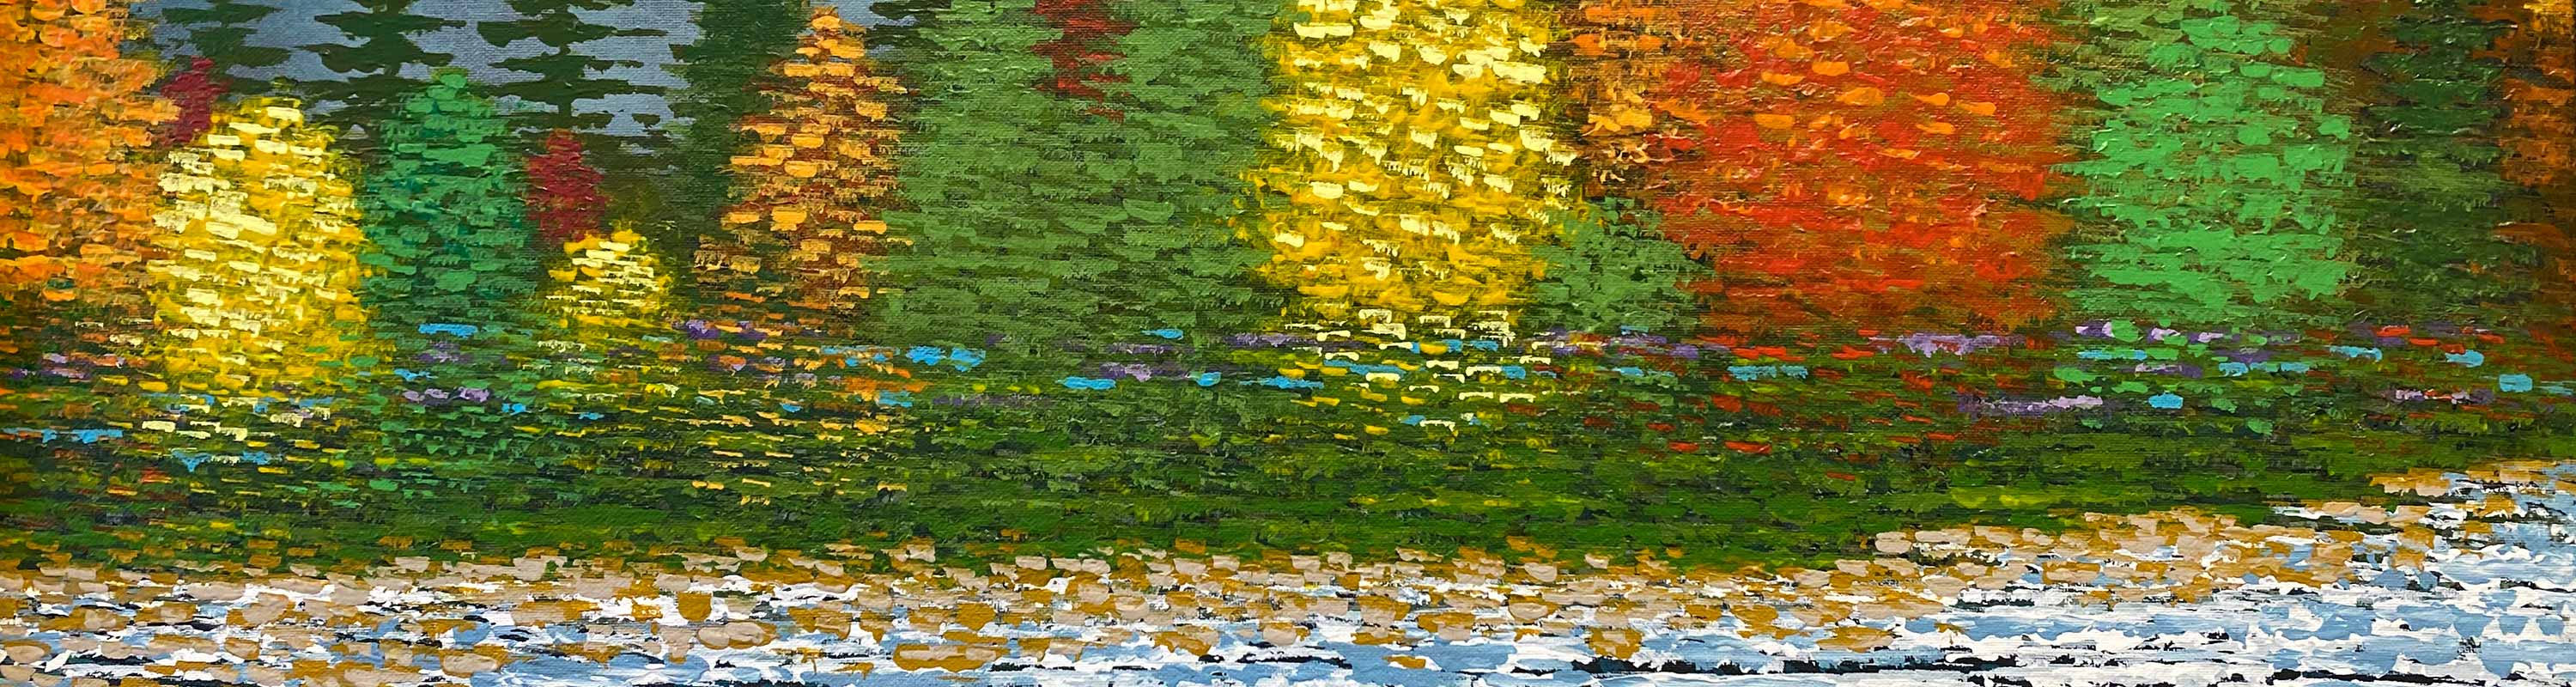 painting of trees in fall colors by water's edge